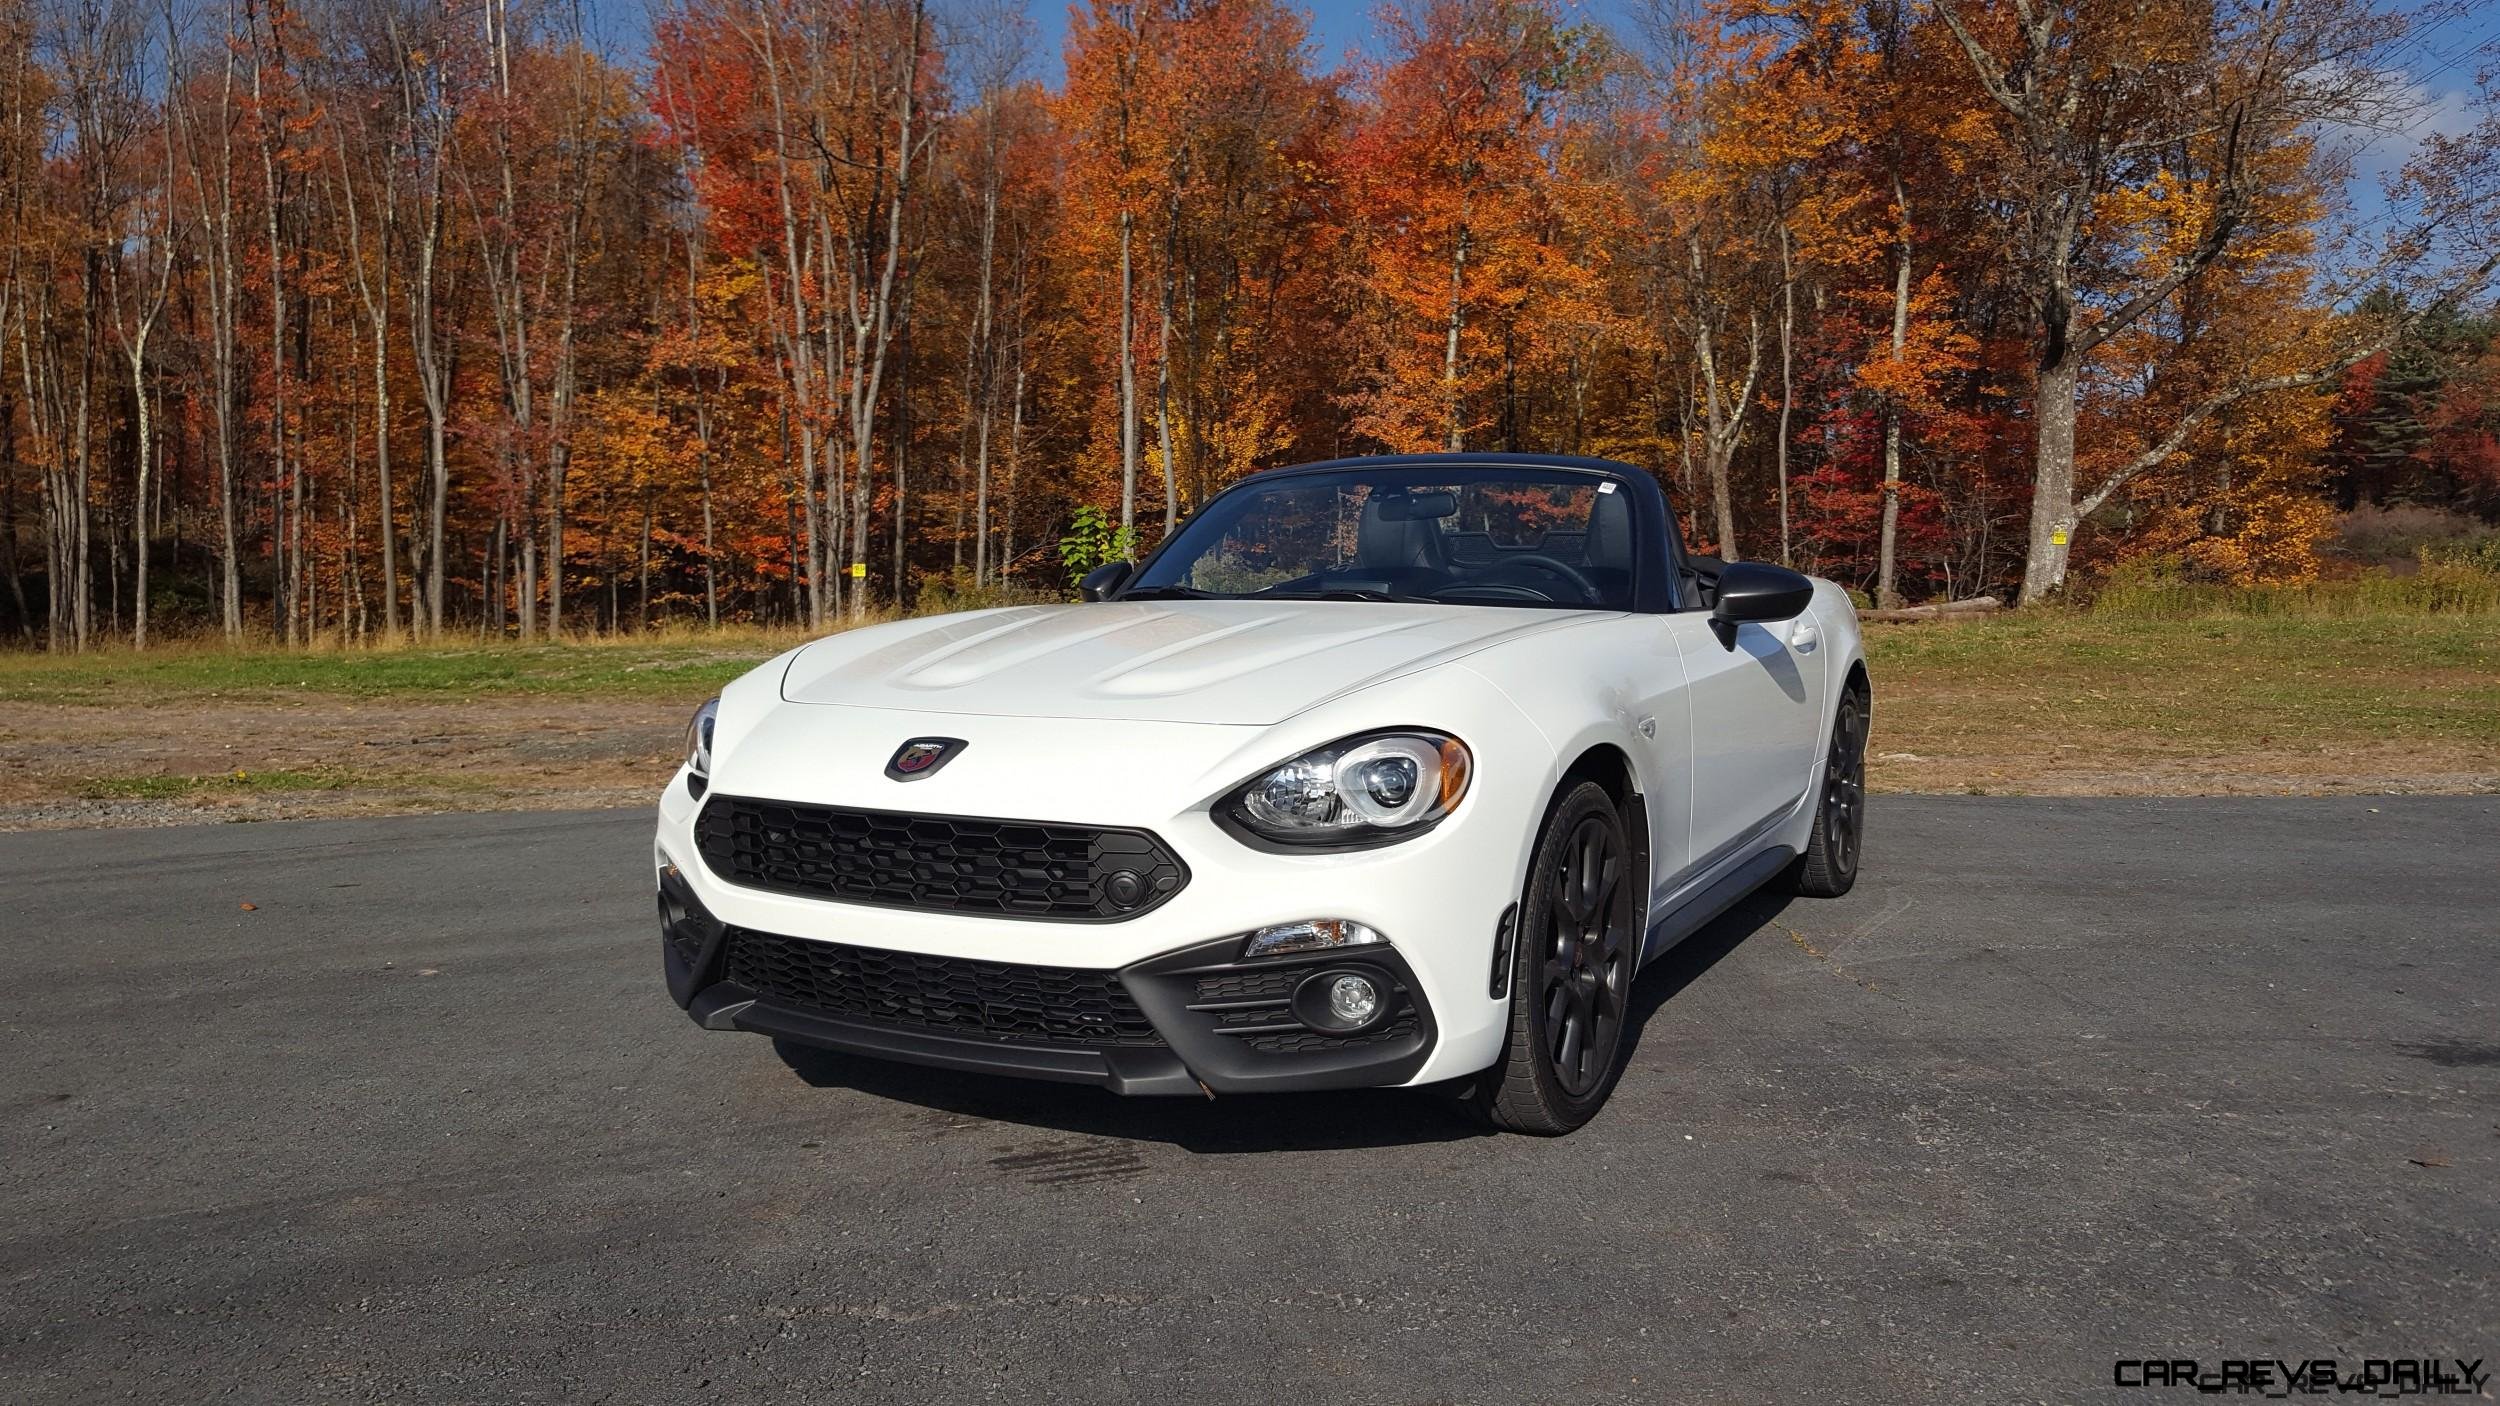 17 Fiat Abarth 124 Spider Road Test Review By Carl Malek Car Shopping Car Revs Daily Com